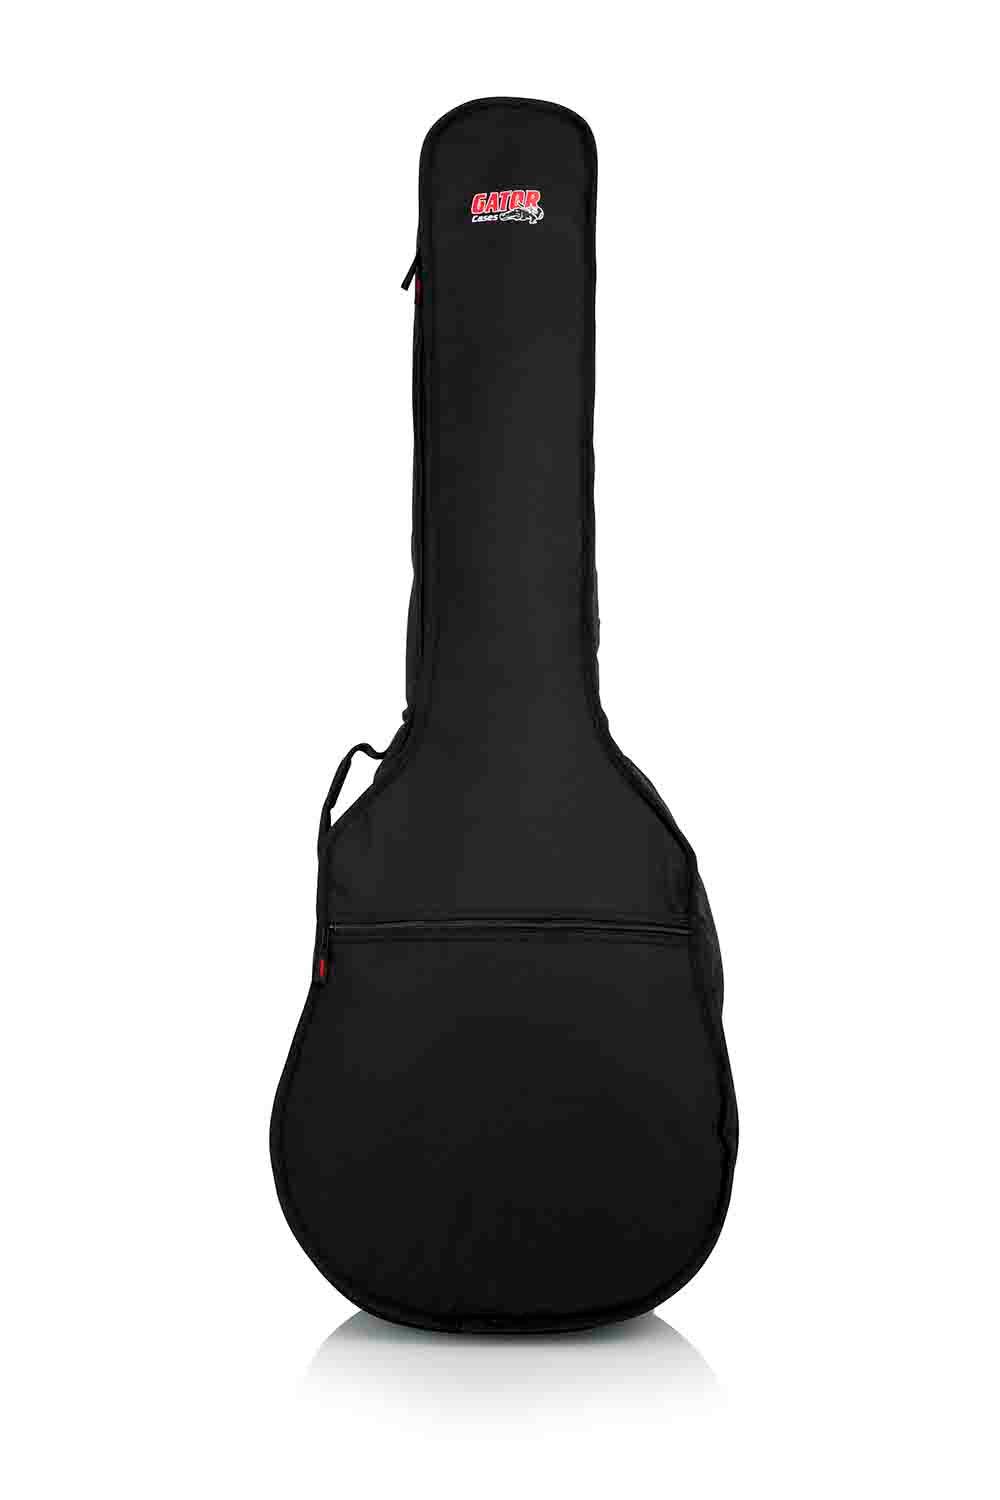 Gator Cases GBE-AC-BASS Gig Bag for Acoustic Bass Guitars - Hollywood DJ